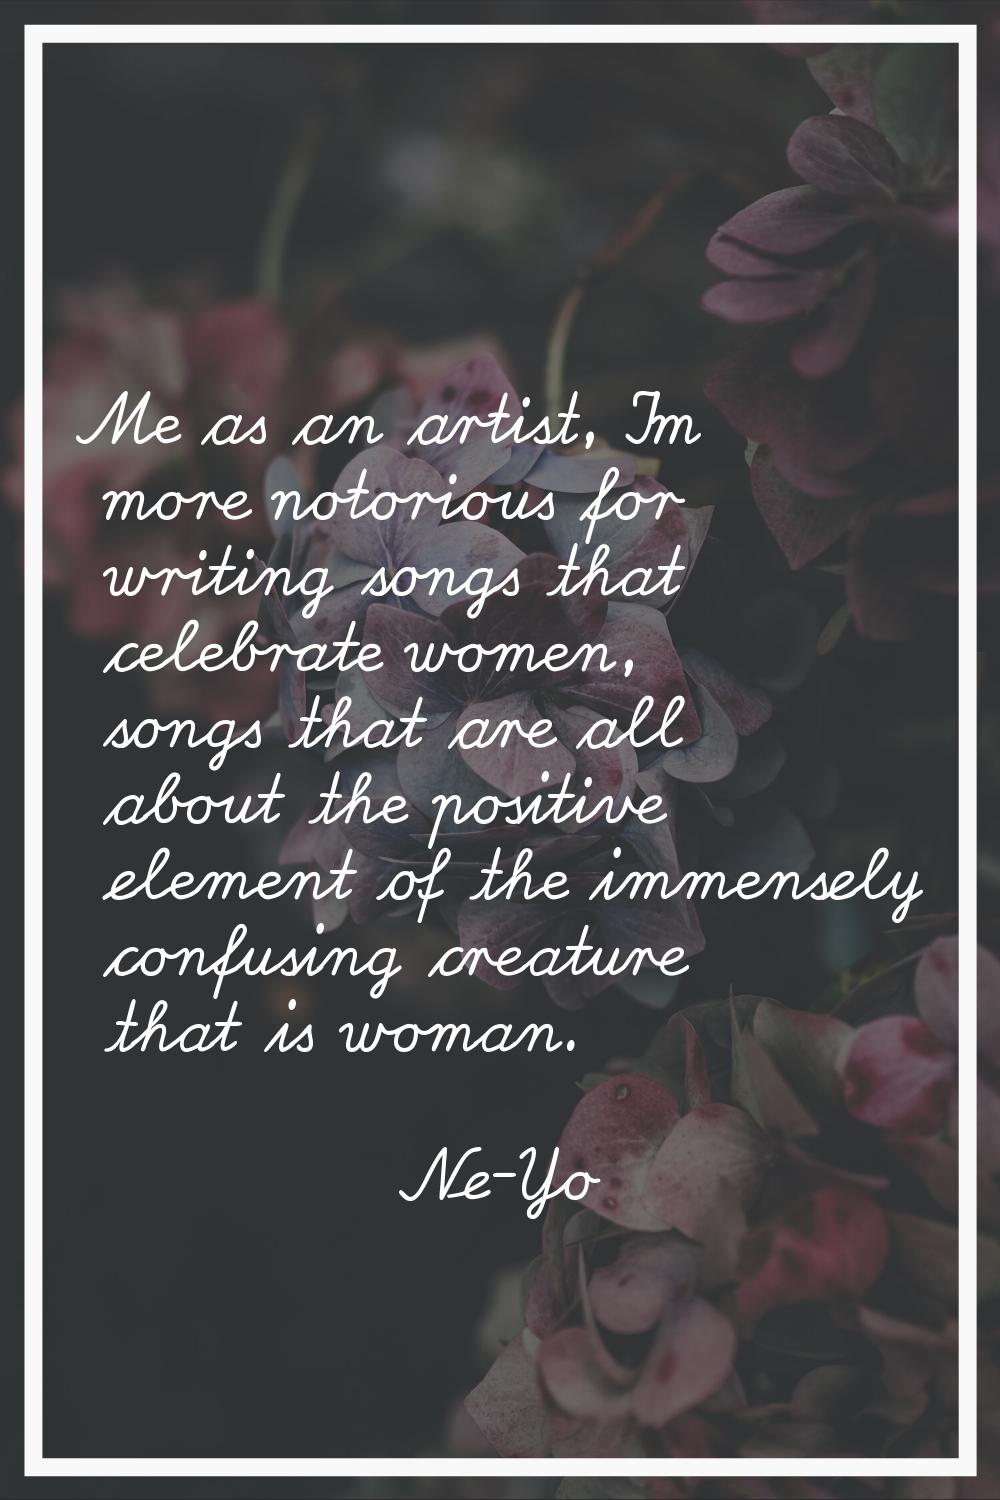 Me as an artist, I'm more notorious for writing songs that celebrate women, songs that are all abou